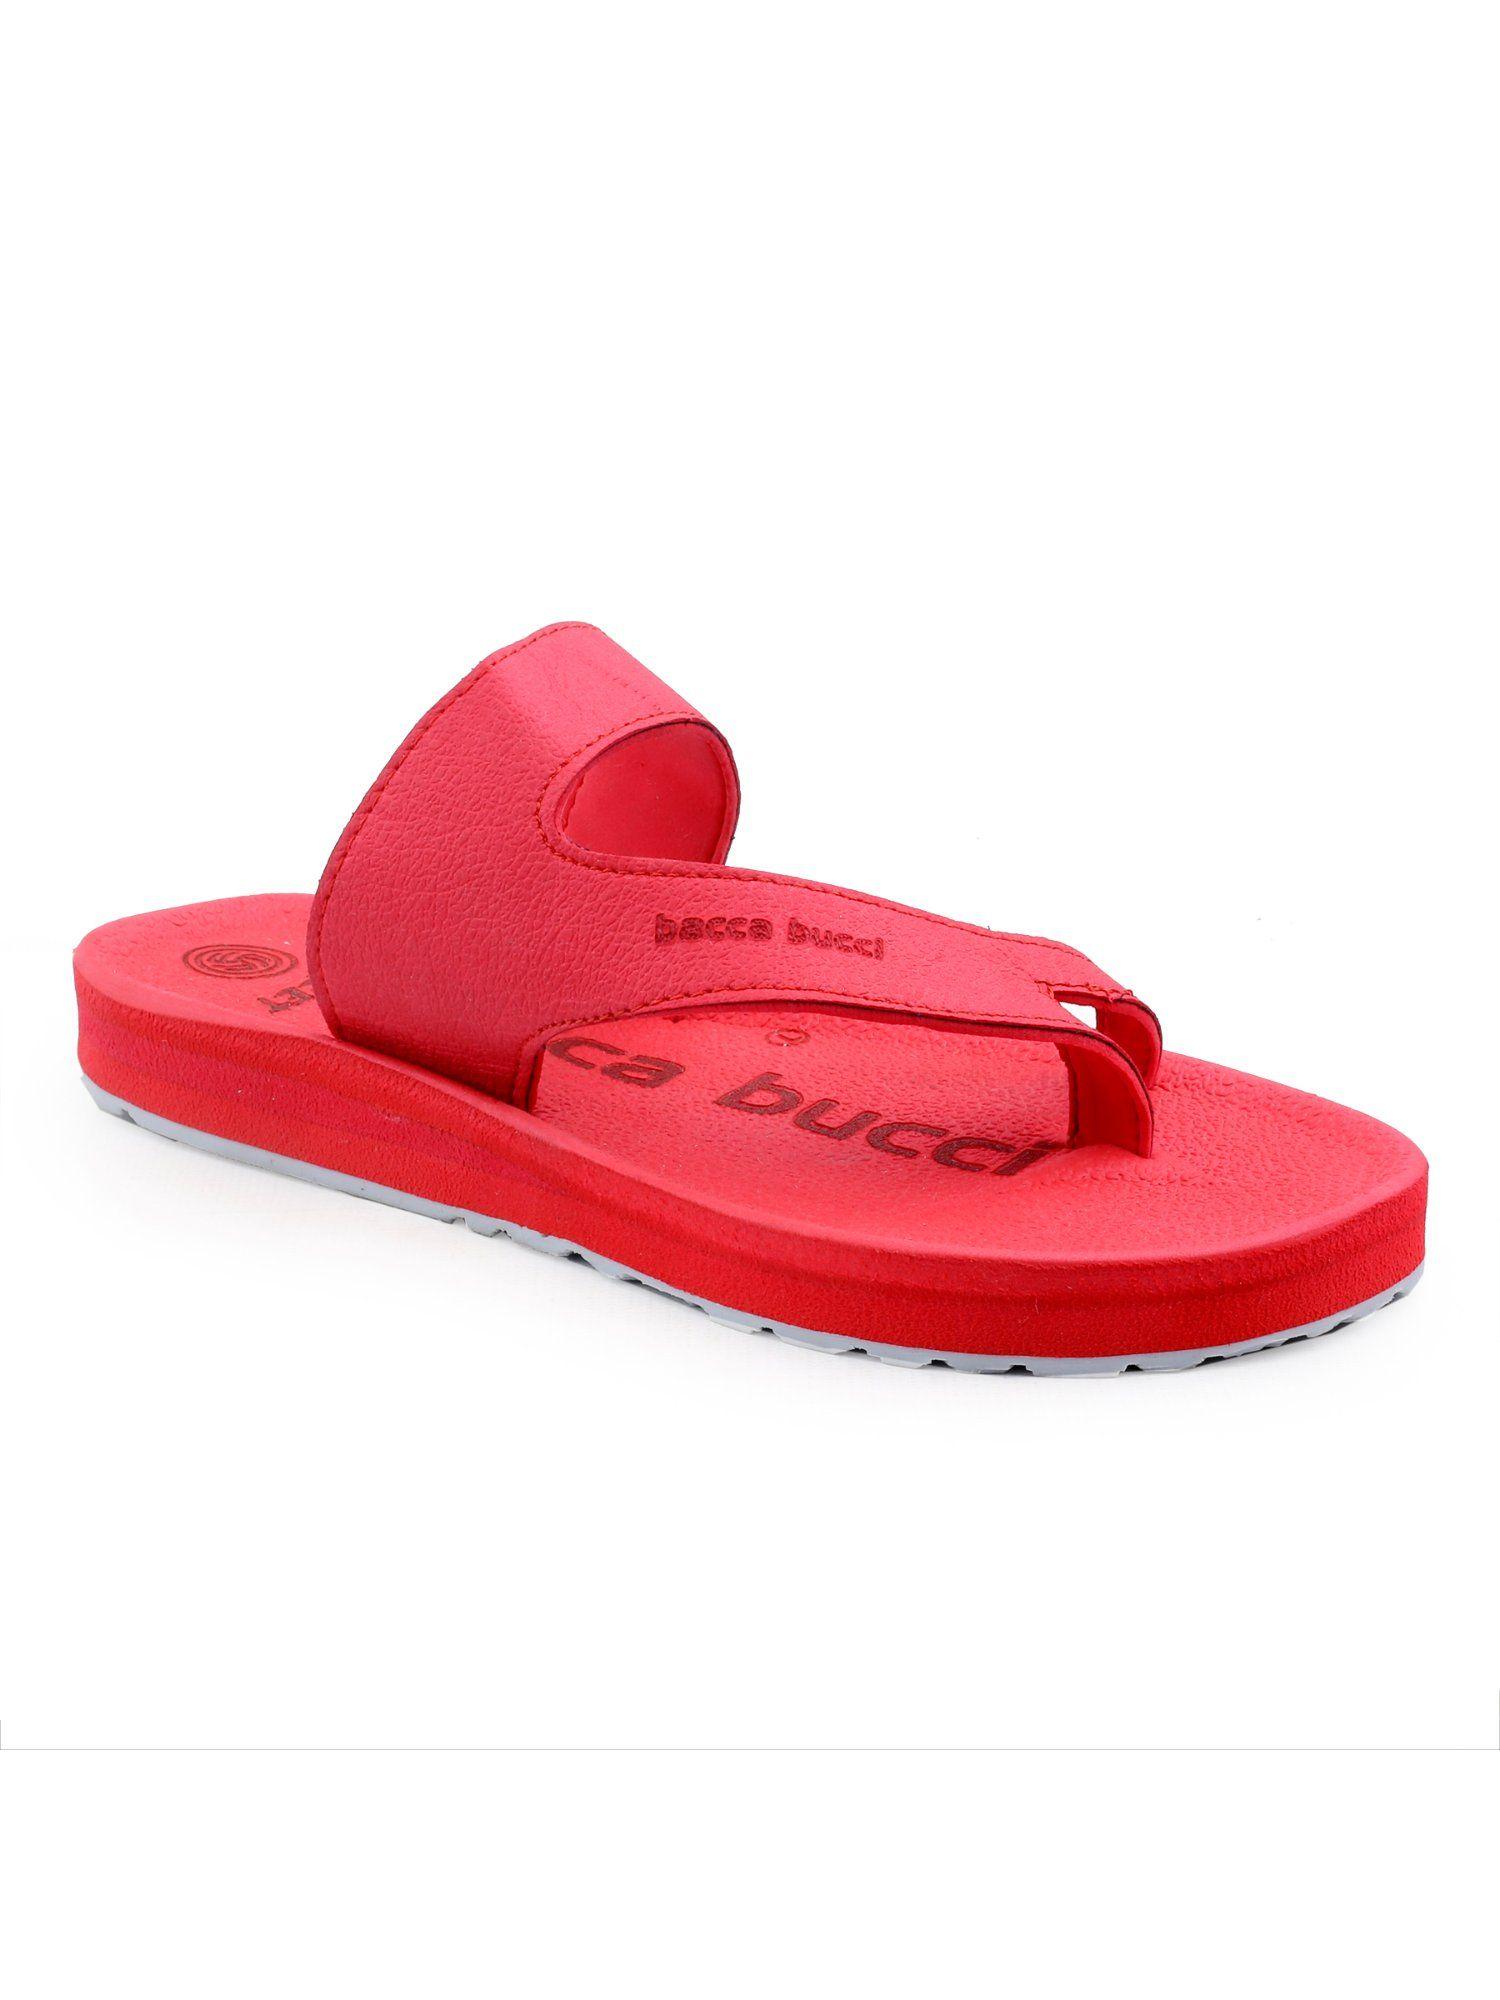 beach-club cloud flipflops with non-slip rubber outsole-red